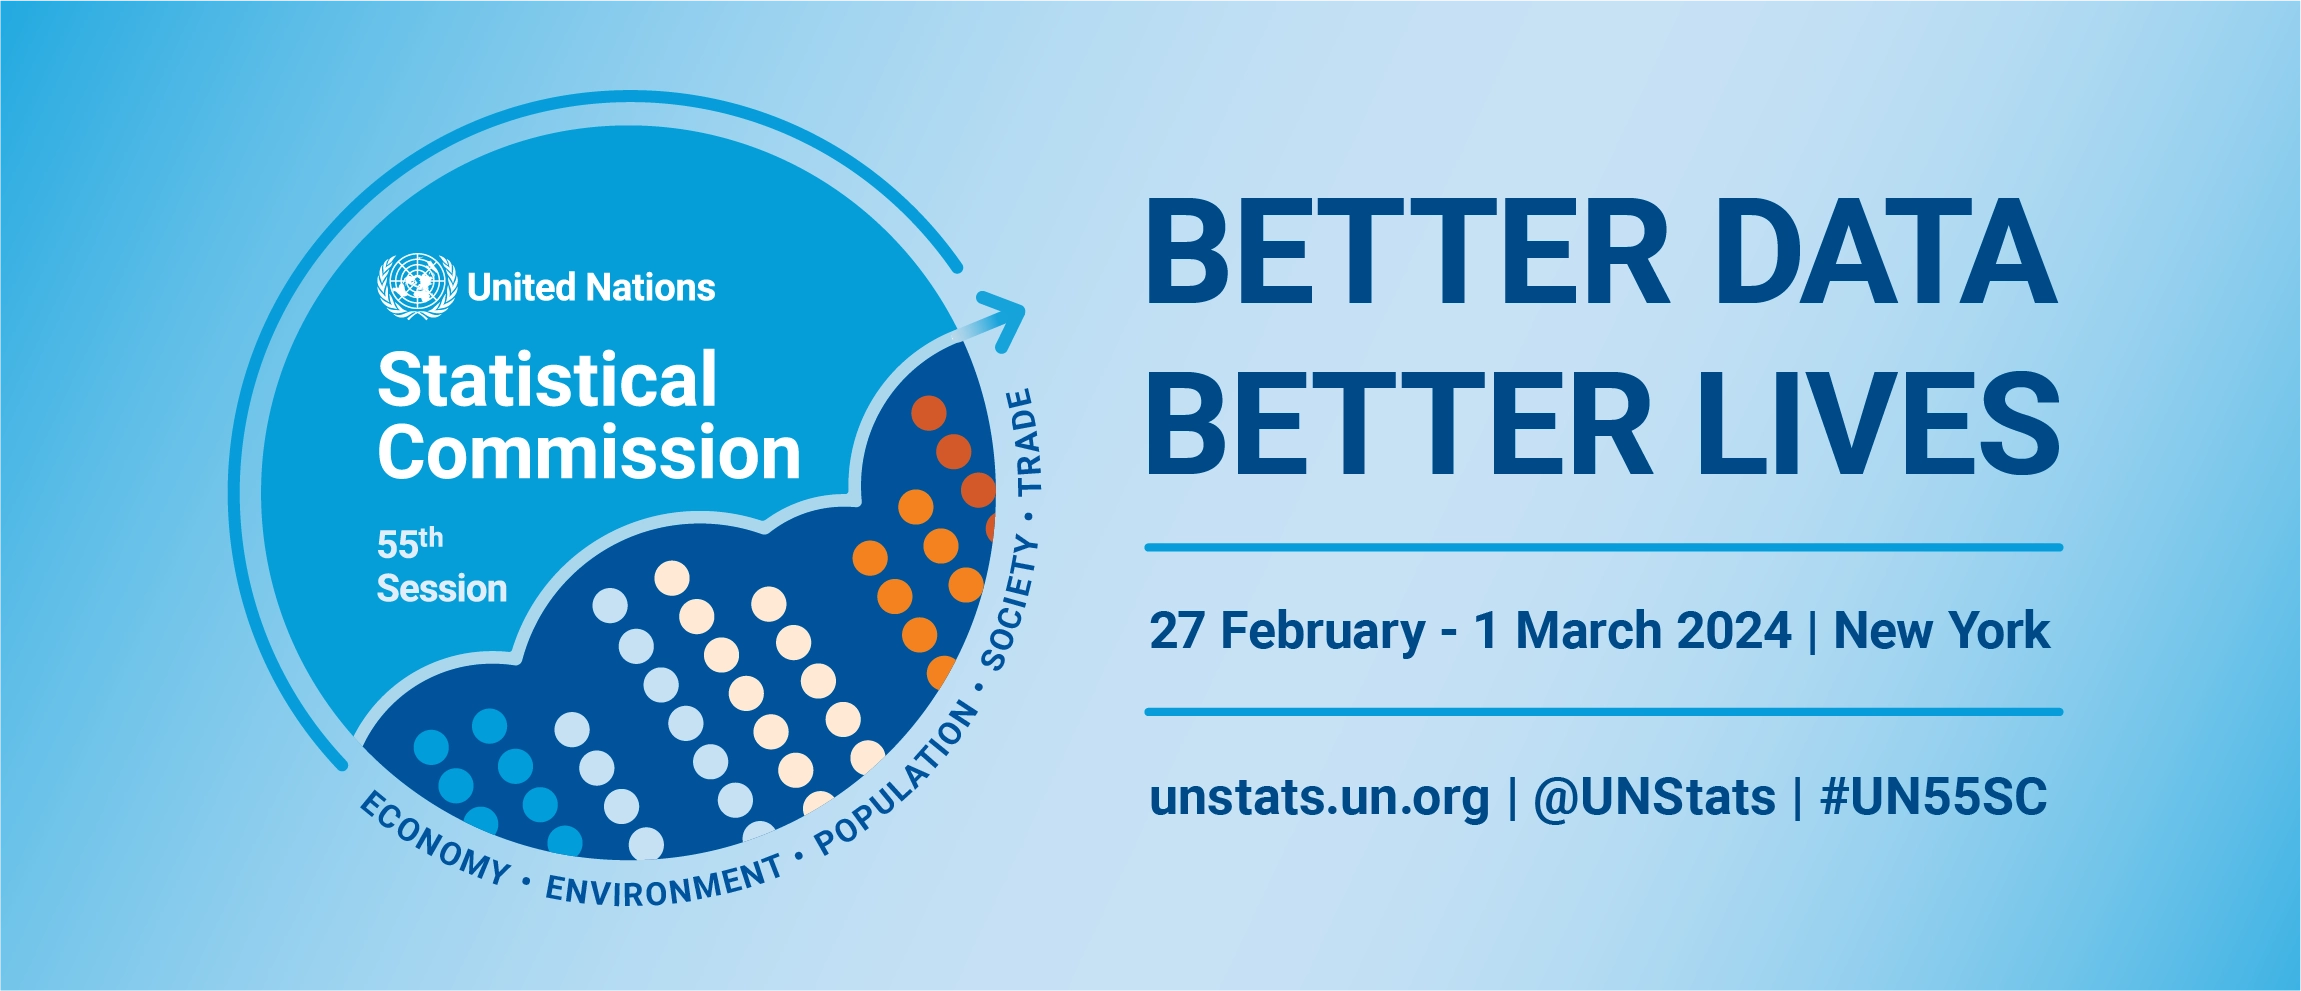 The 55th session of the United Nations Statistical Commission